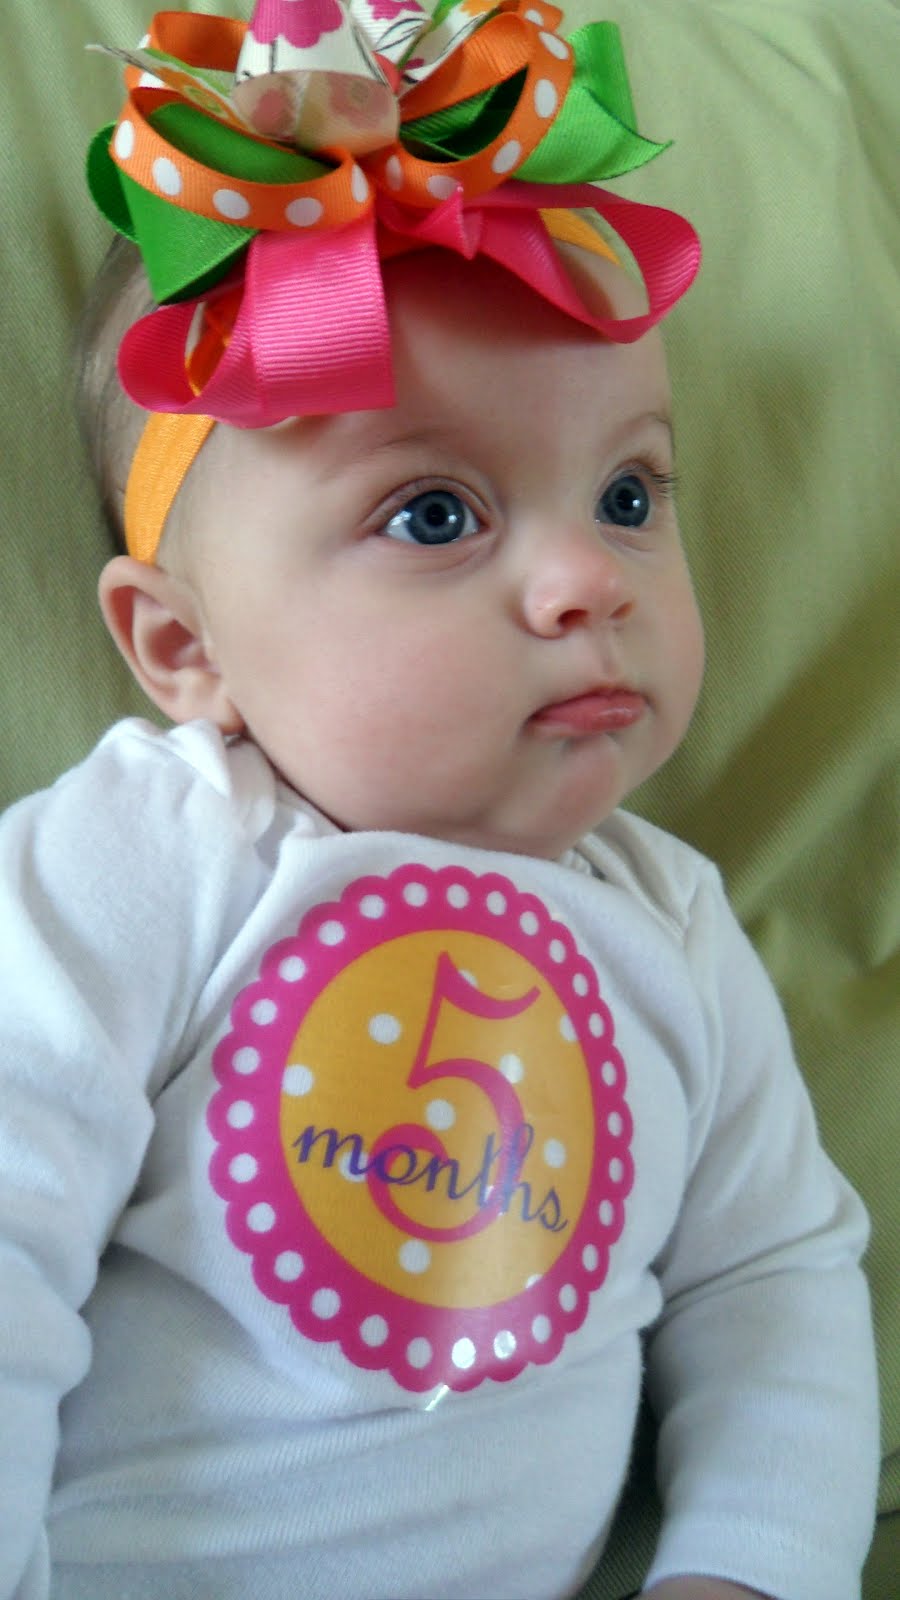 Dinos Are Not Extinct: Happy 5 Months Baby Girl